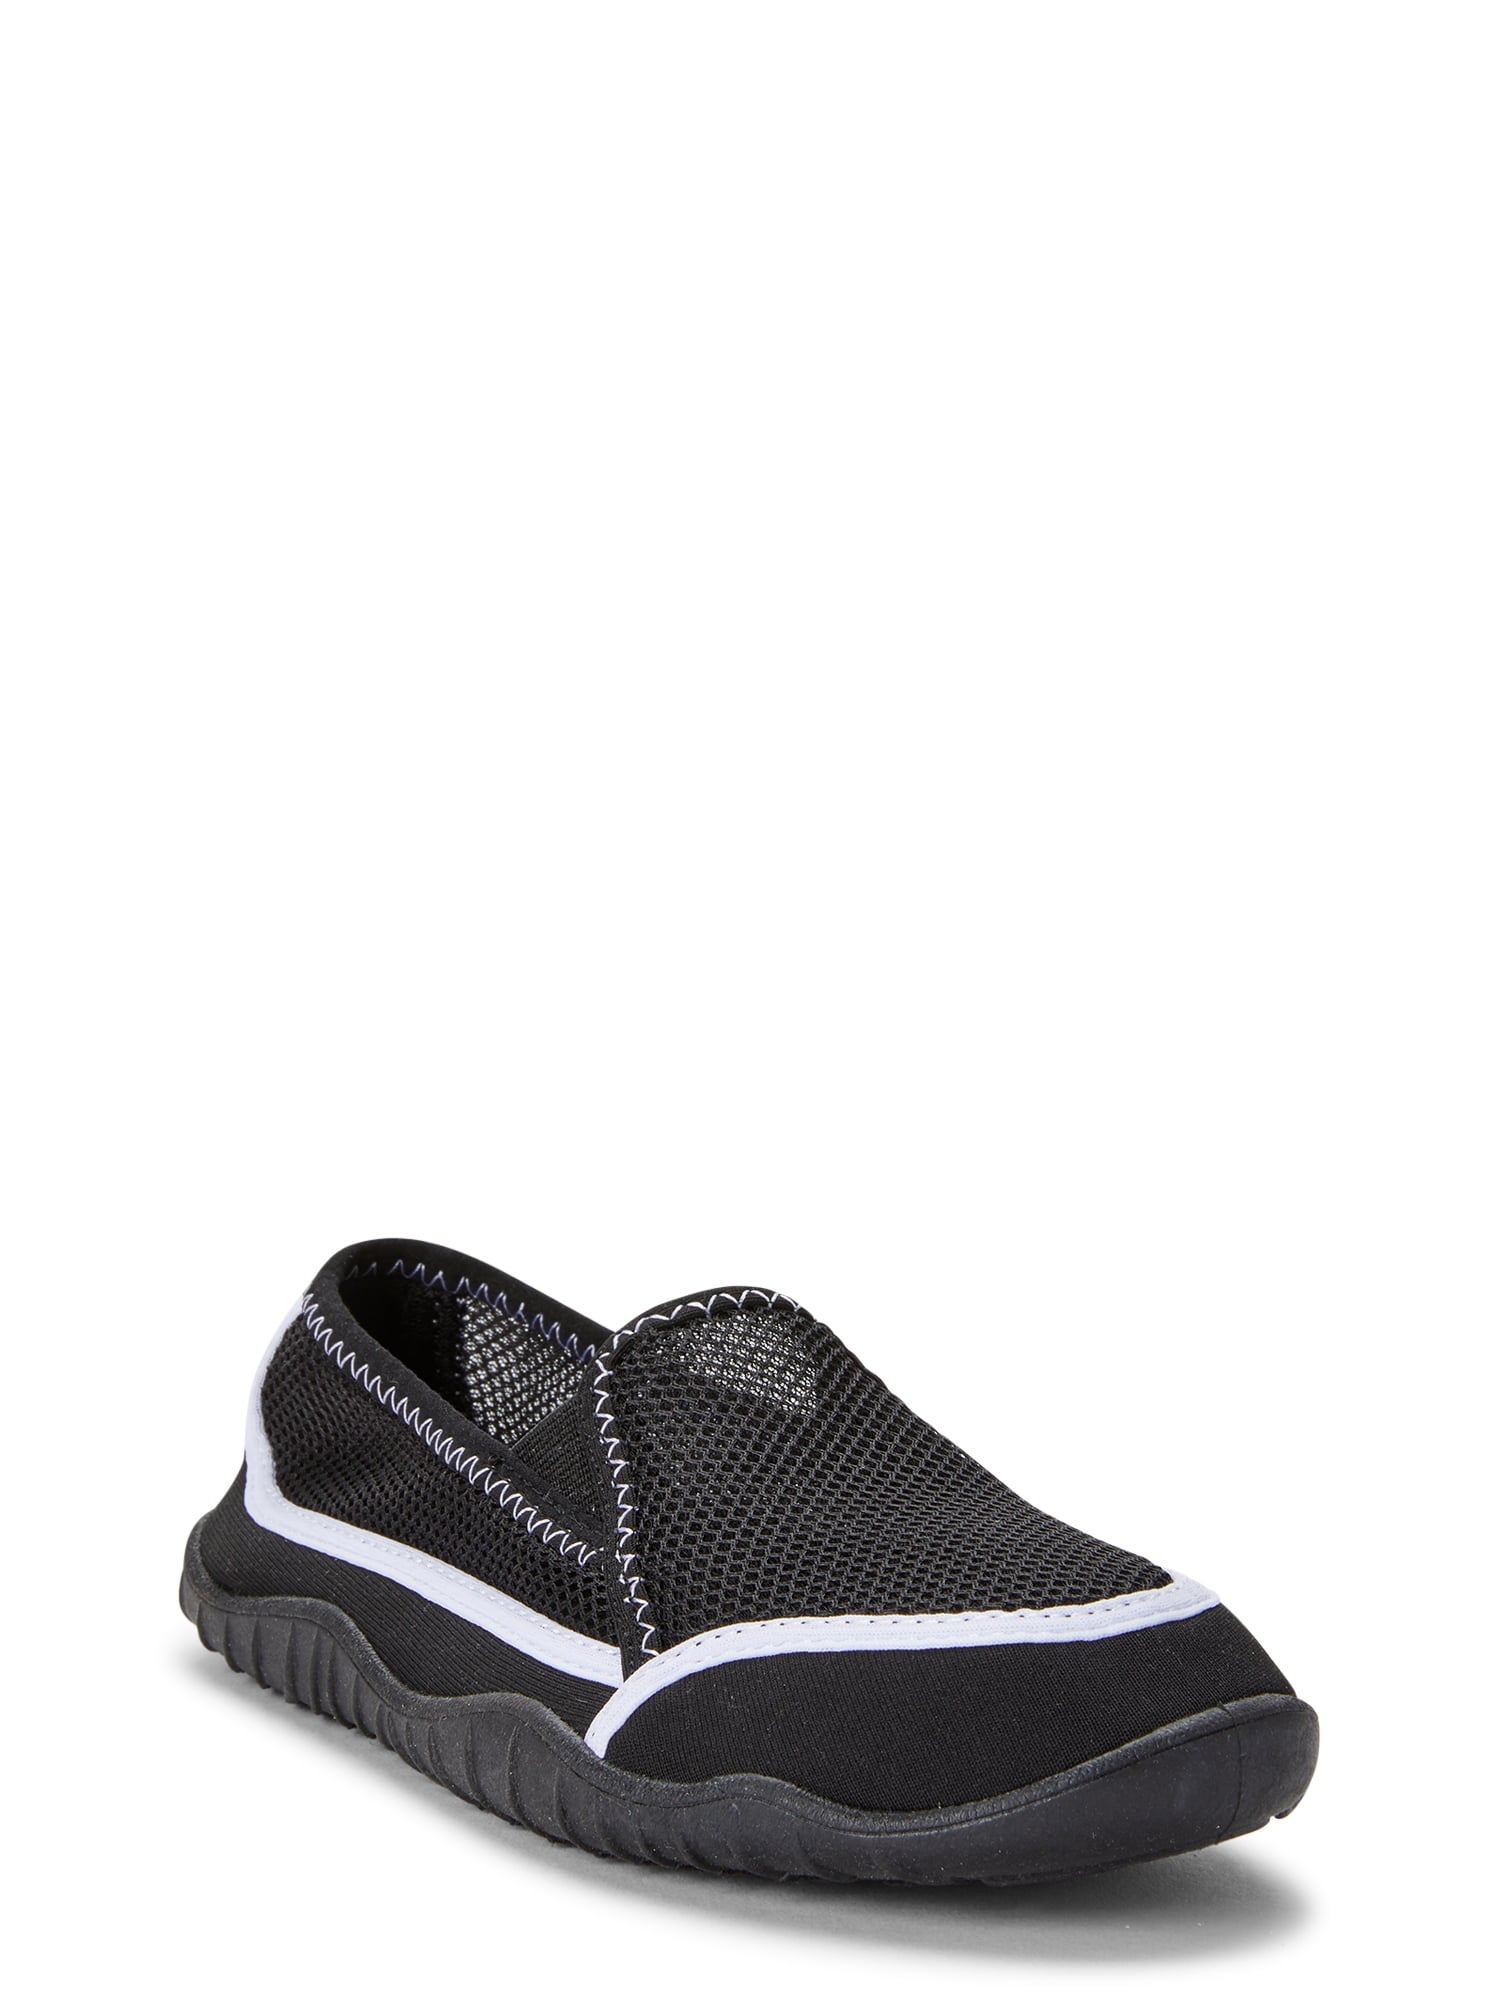 Athletic Works Women's Water Shoes 